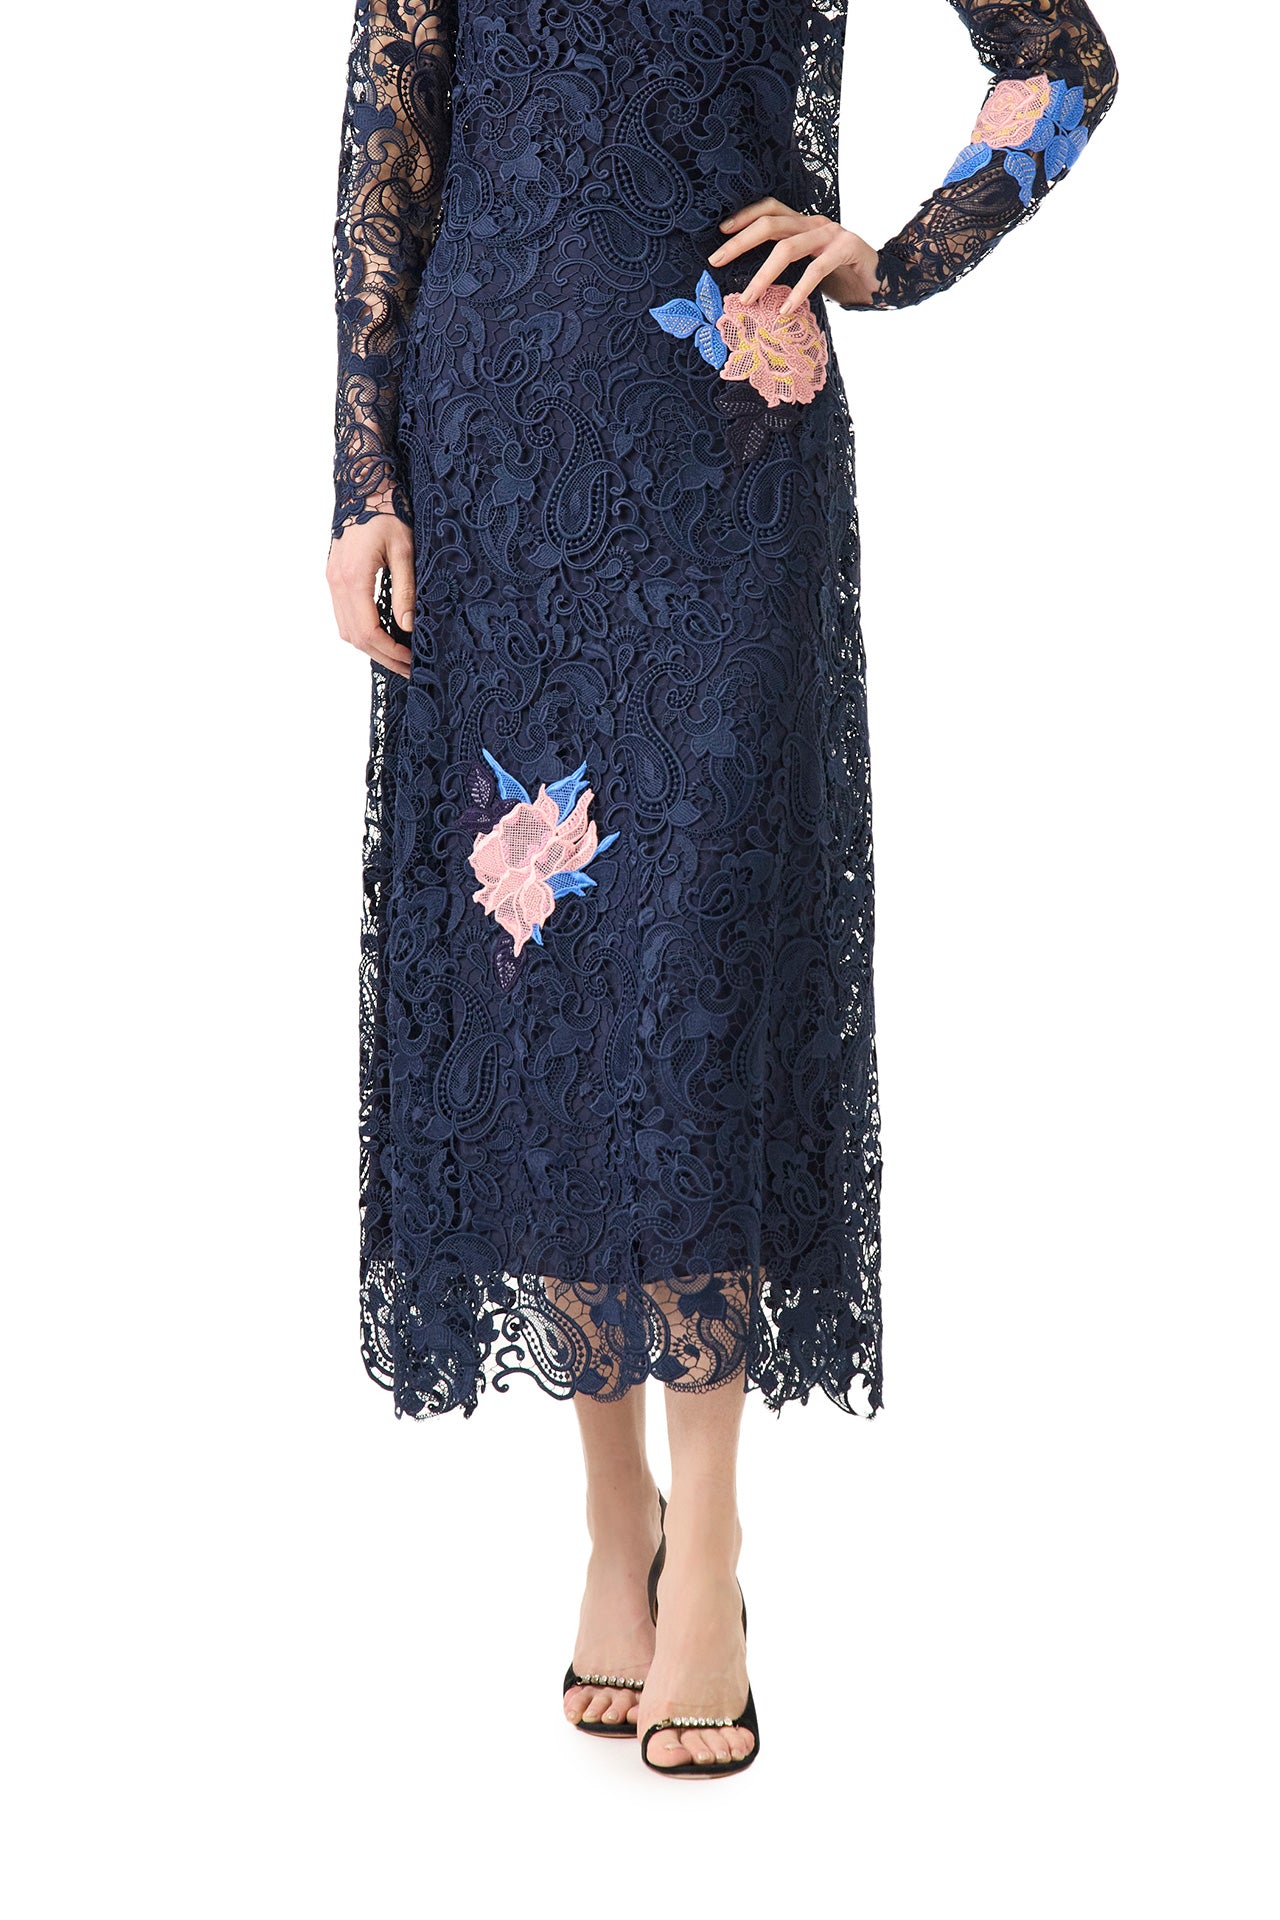 Monique Lhuillier midi-length navy guipure lace skirt with pink lace flowers - front.